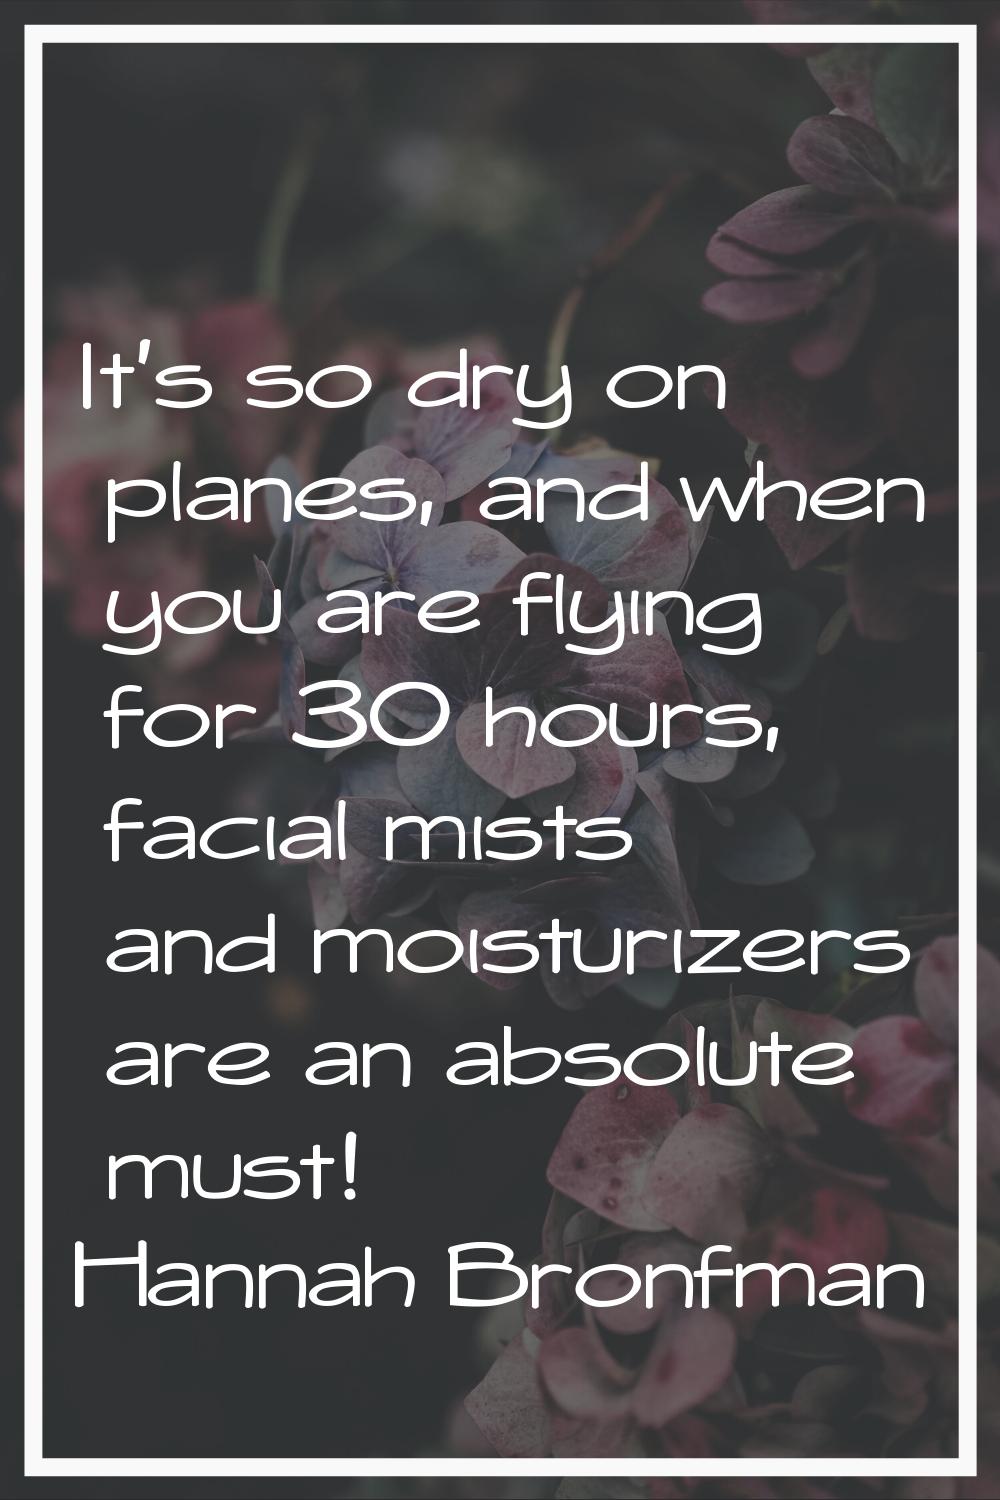 It's so dry on planes, and when you are flying for 30 hours, facial mists and moisturizers are an a